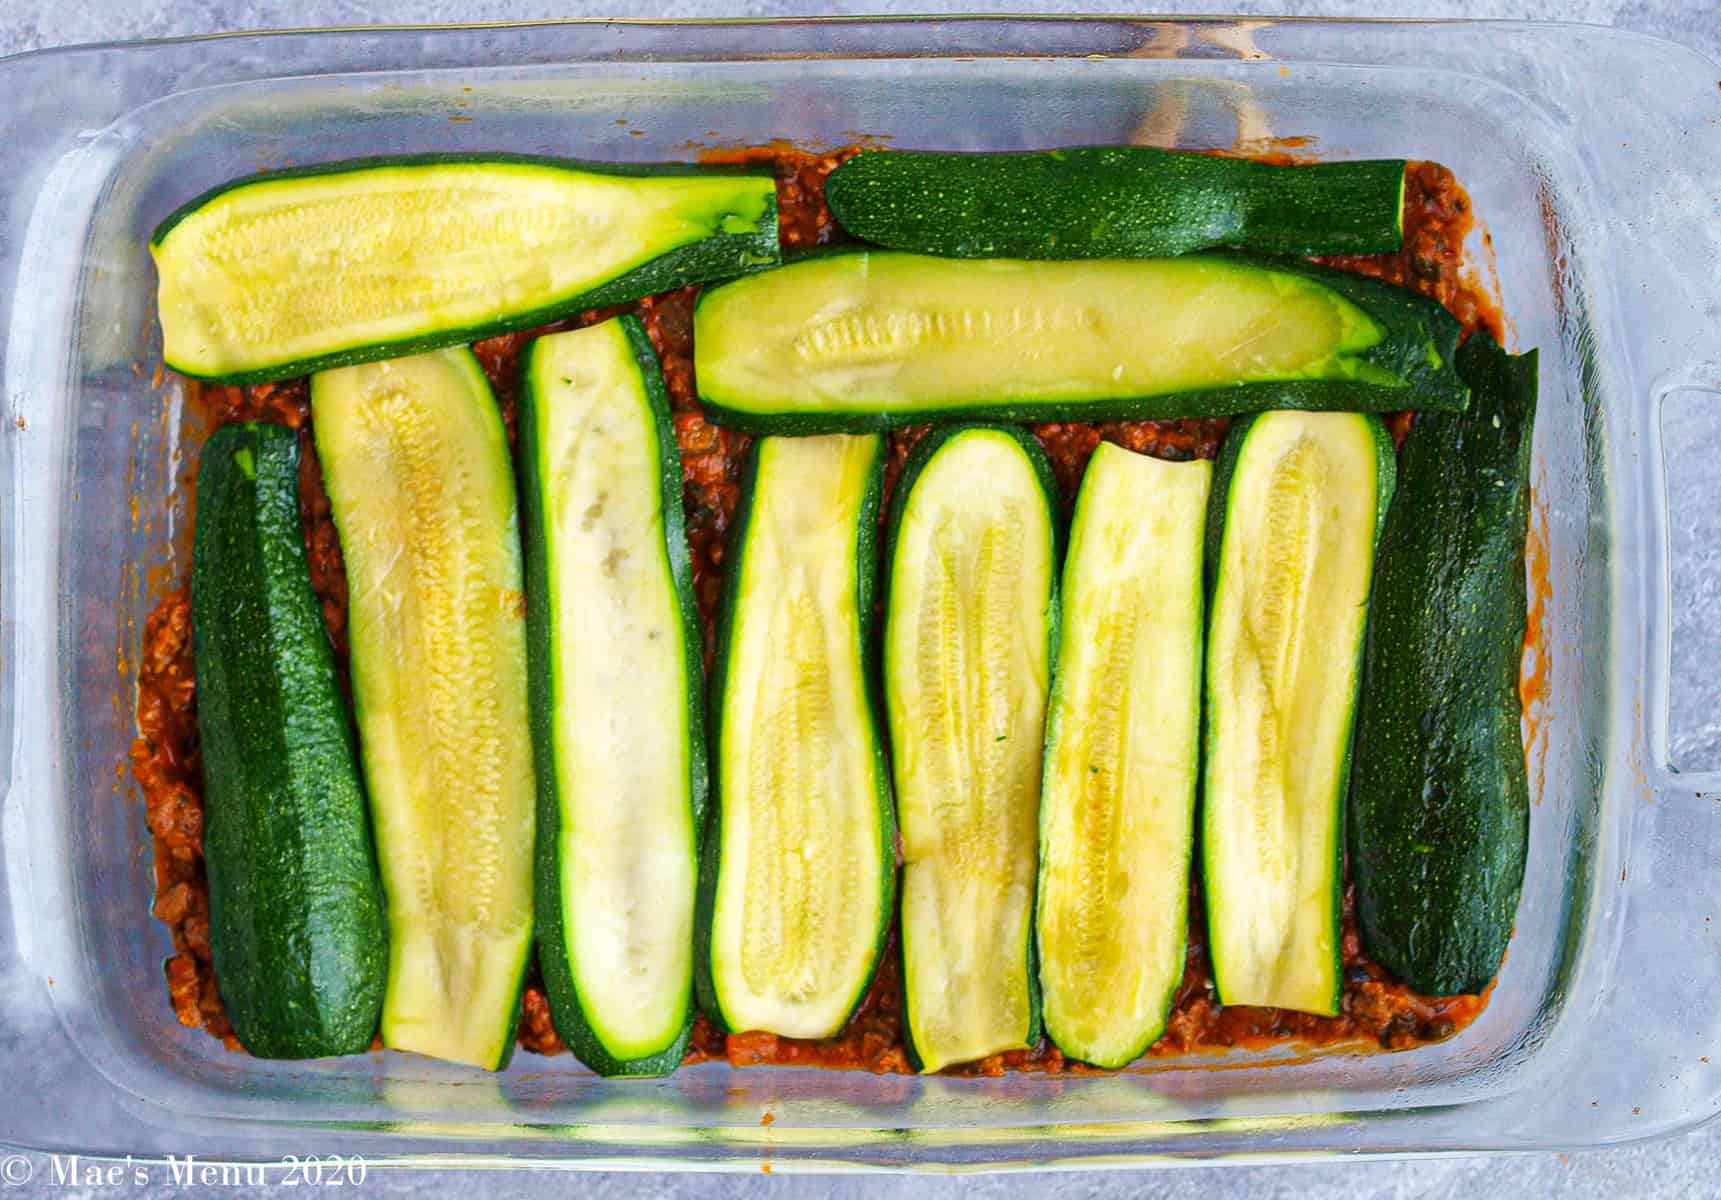 The first 2 layers of lasagna in a pan: meat sauce with zucchini slices on op